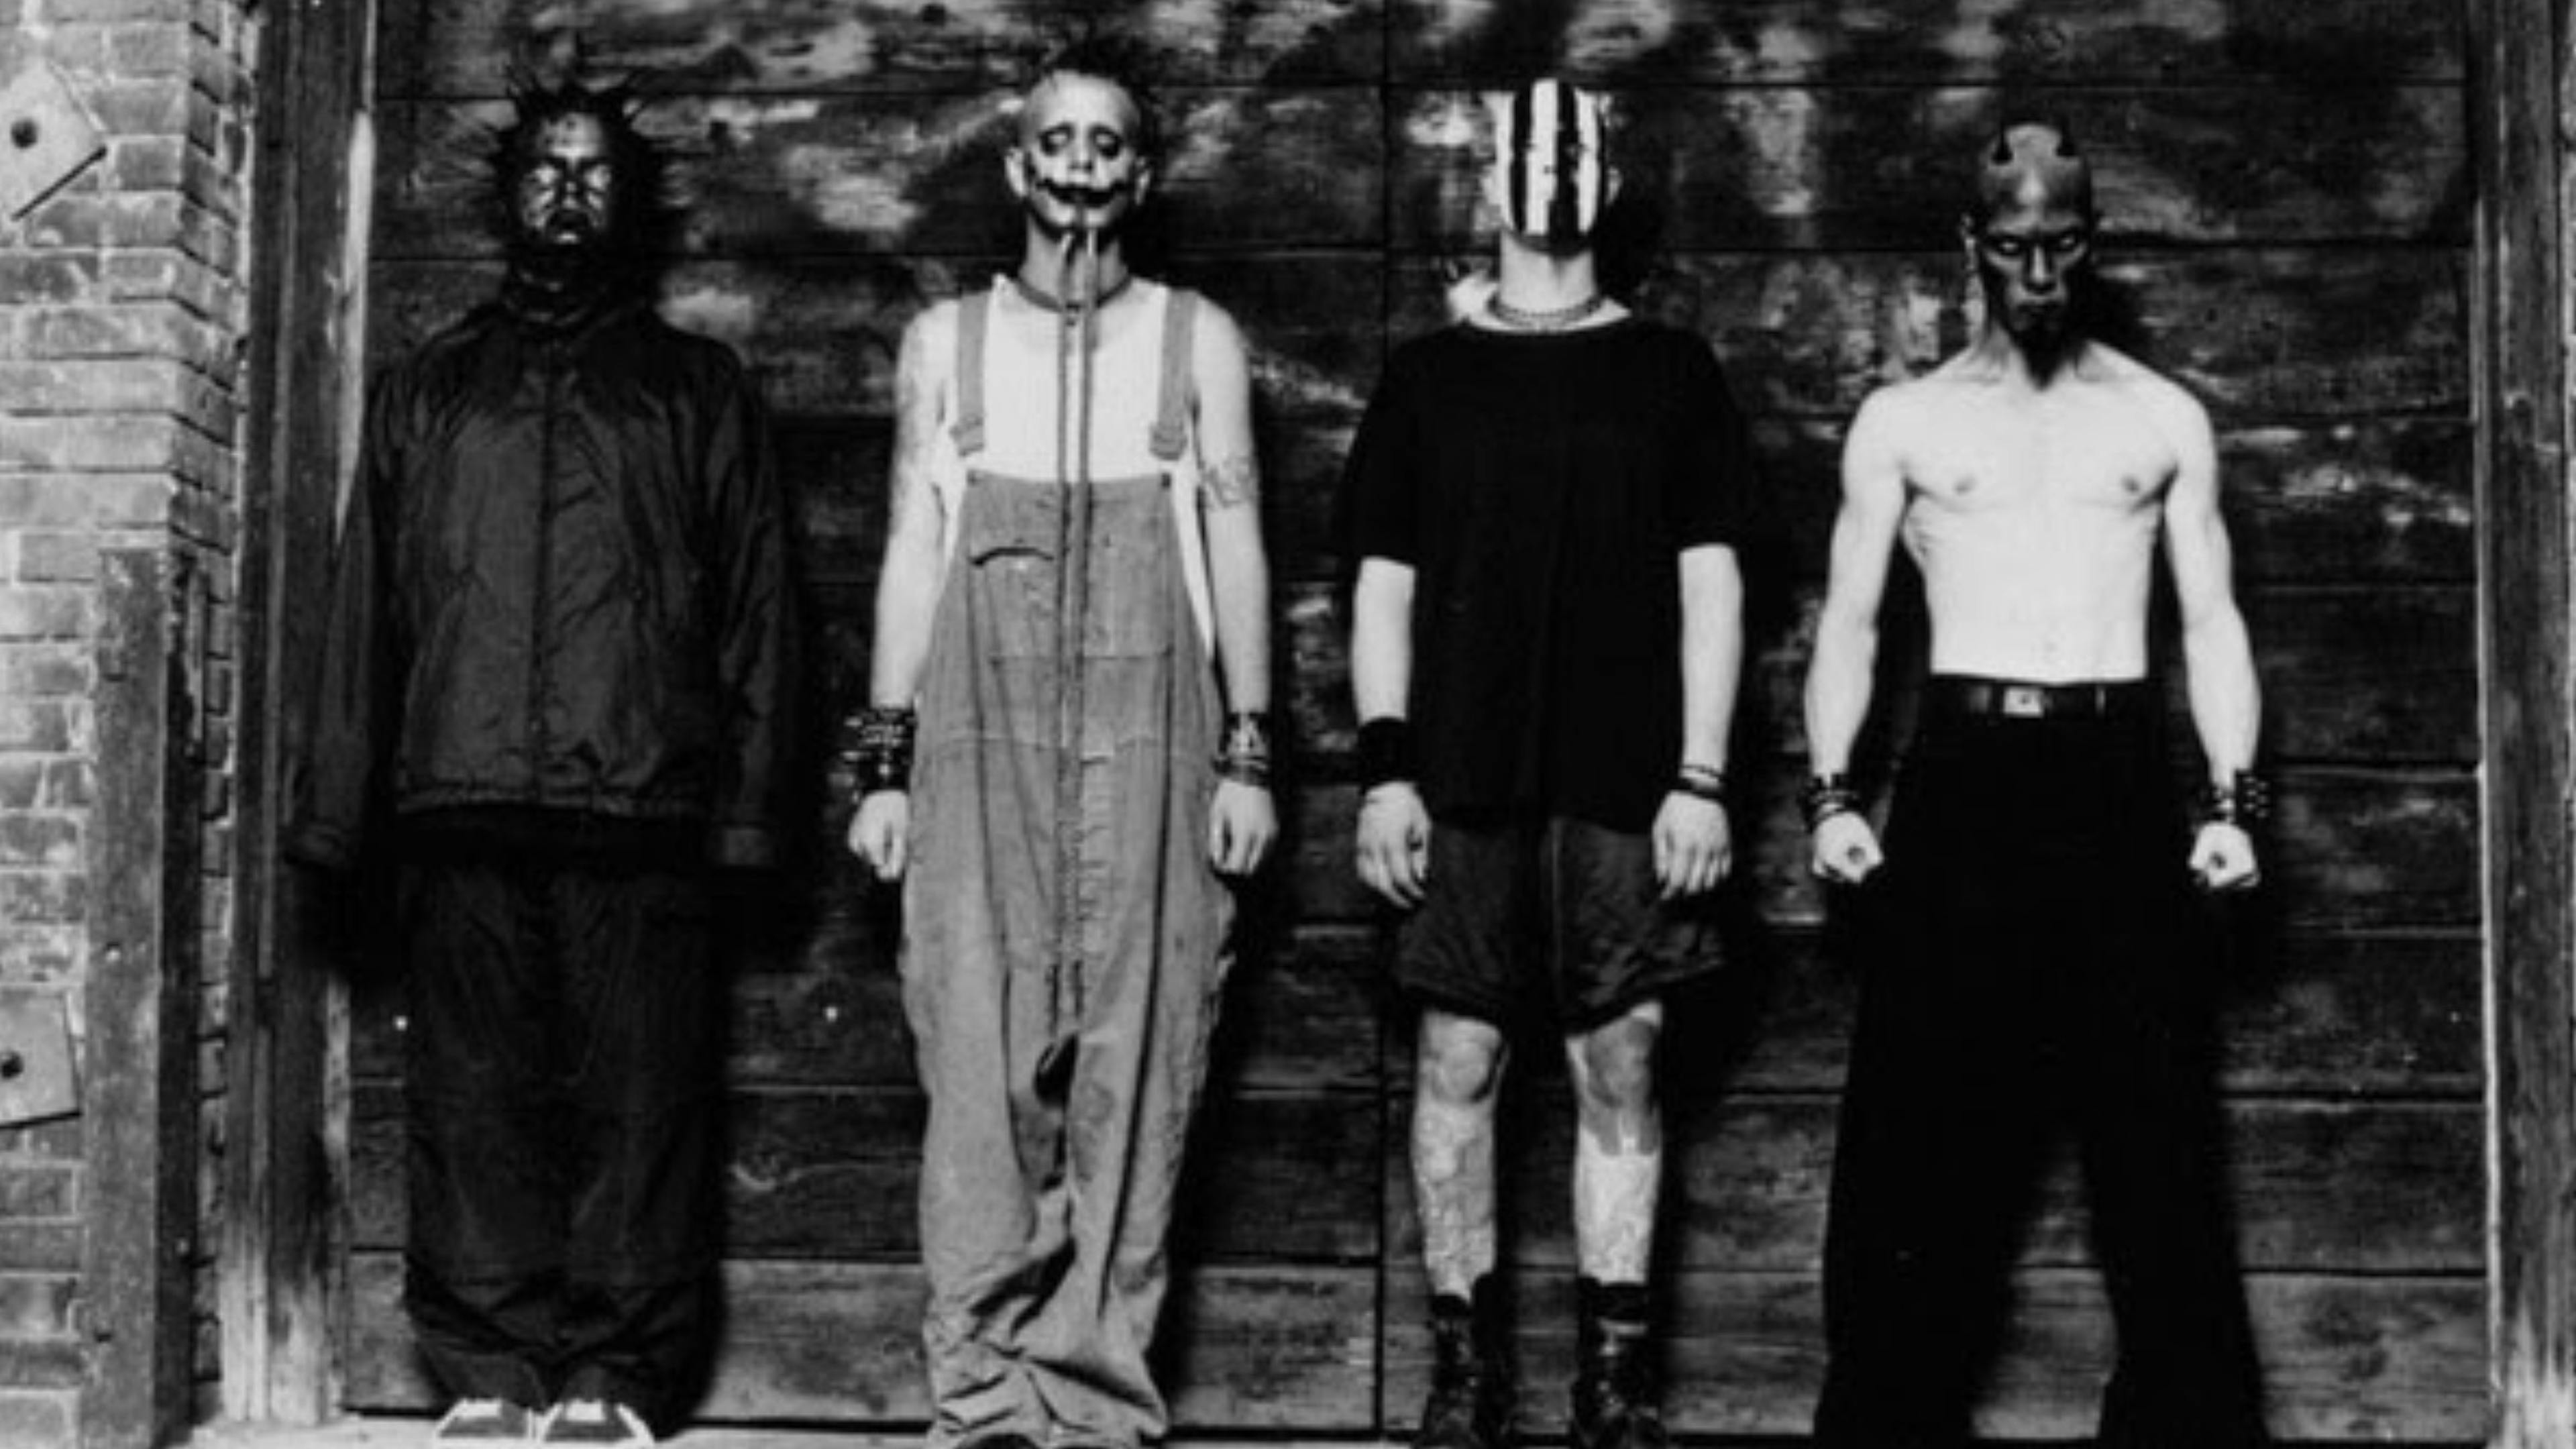 Here's the setlist from Mudvayne's first gig in 12 years